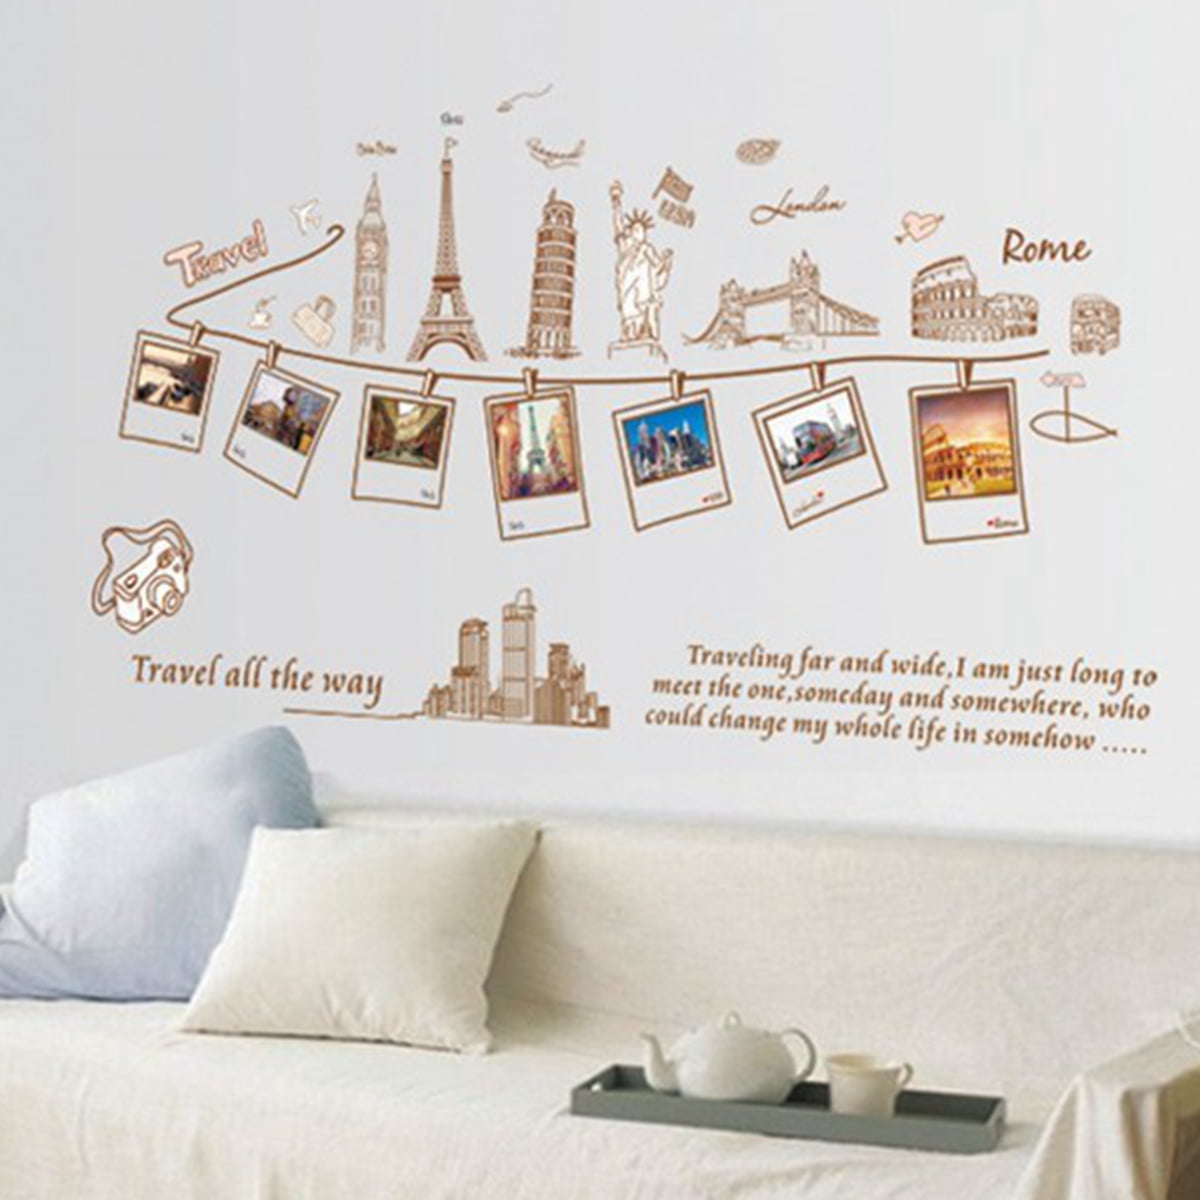 New DIY Wall Home Room Decor Art Quote Decal Stickers Bedroom Removable Mural 